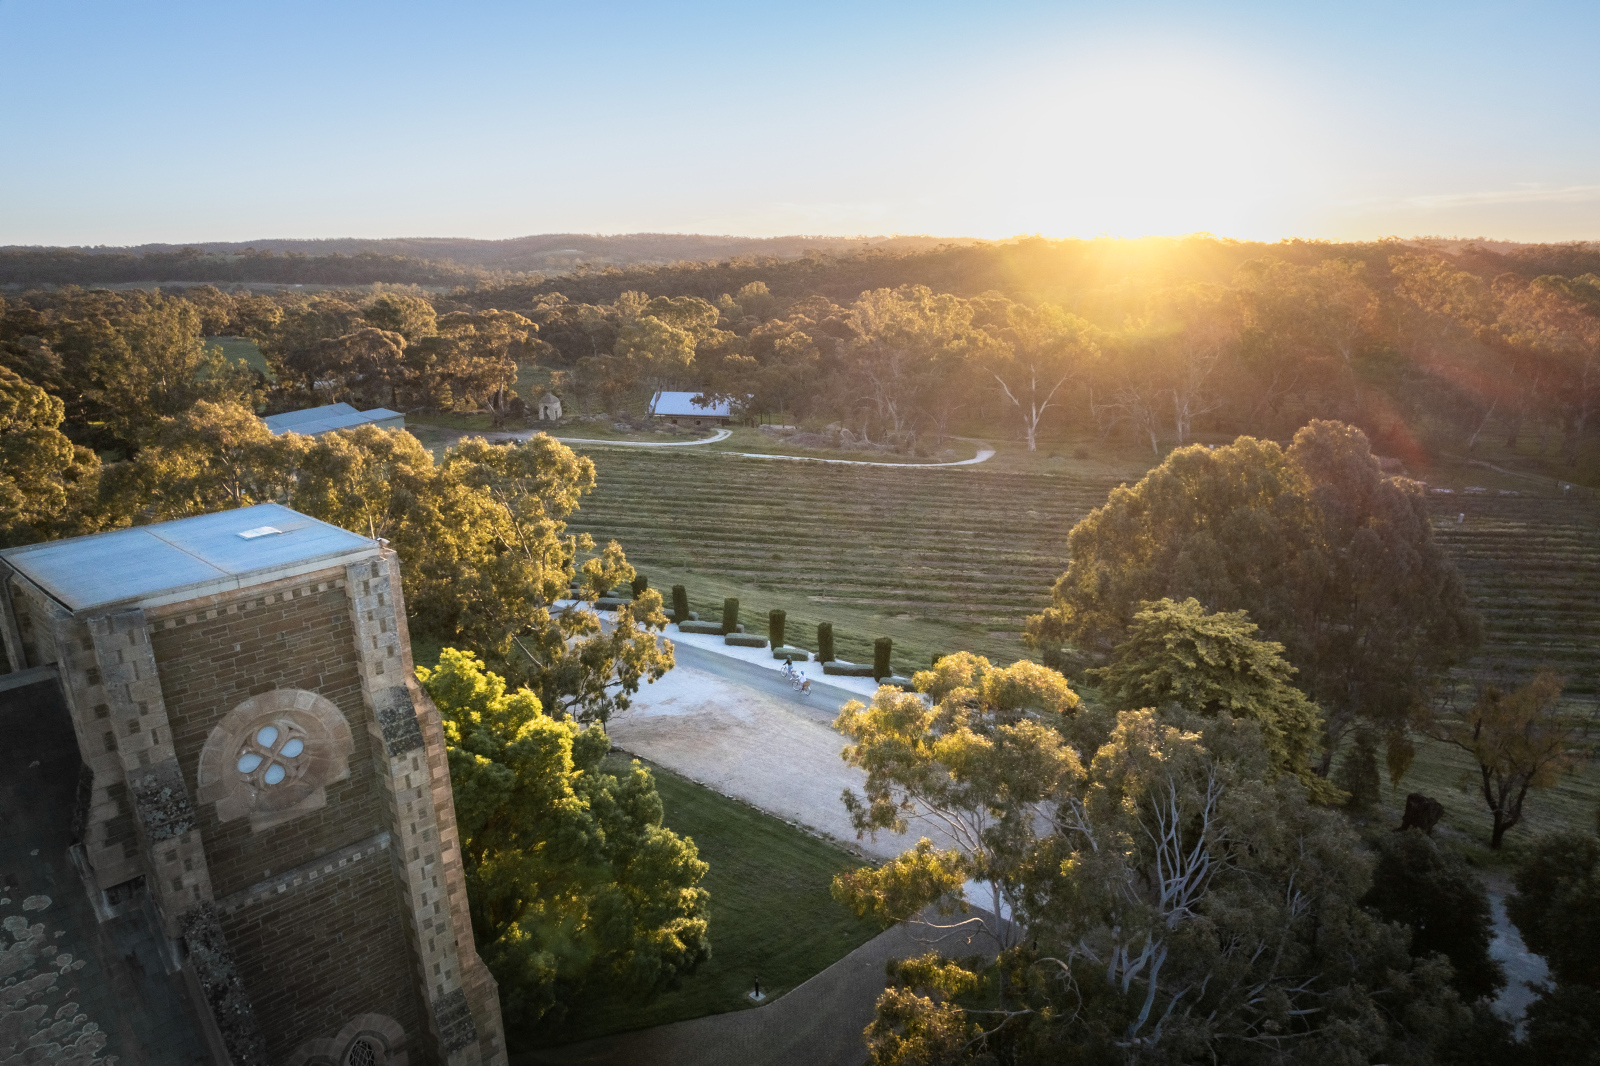 How to get the most out of the Clare Valley